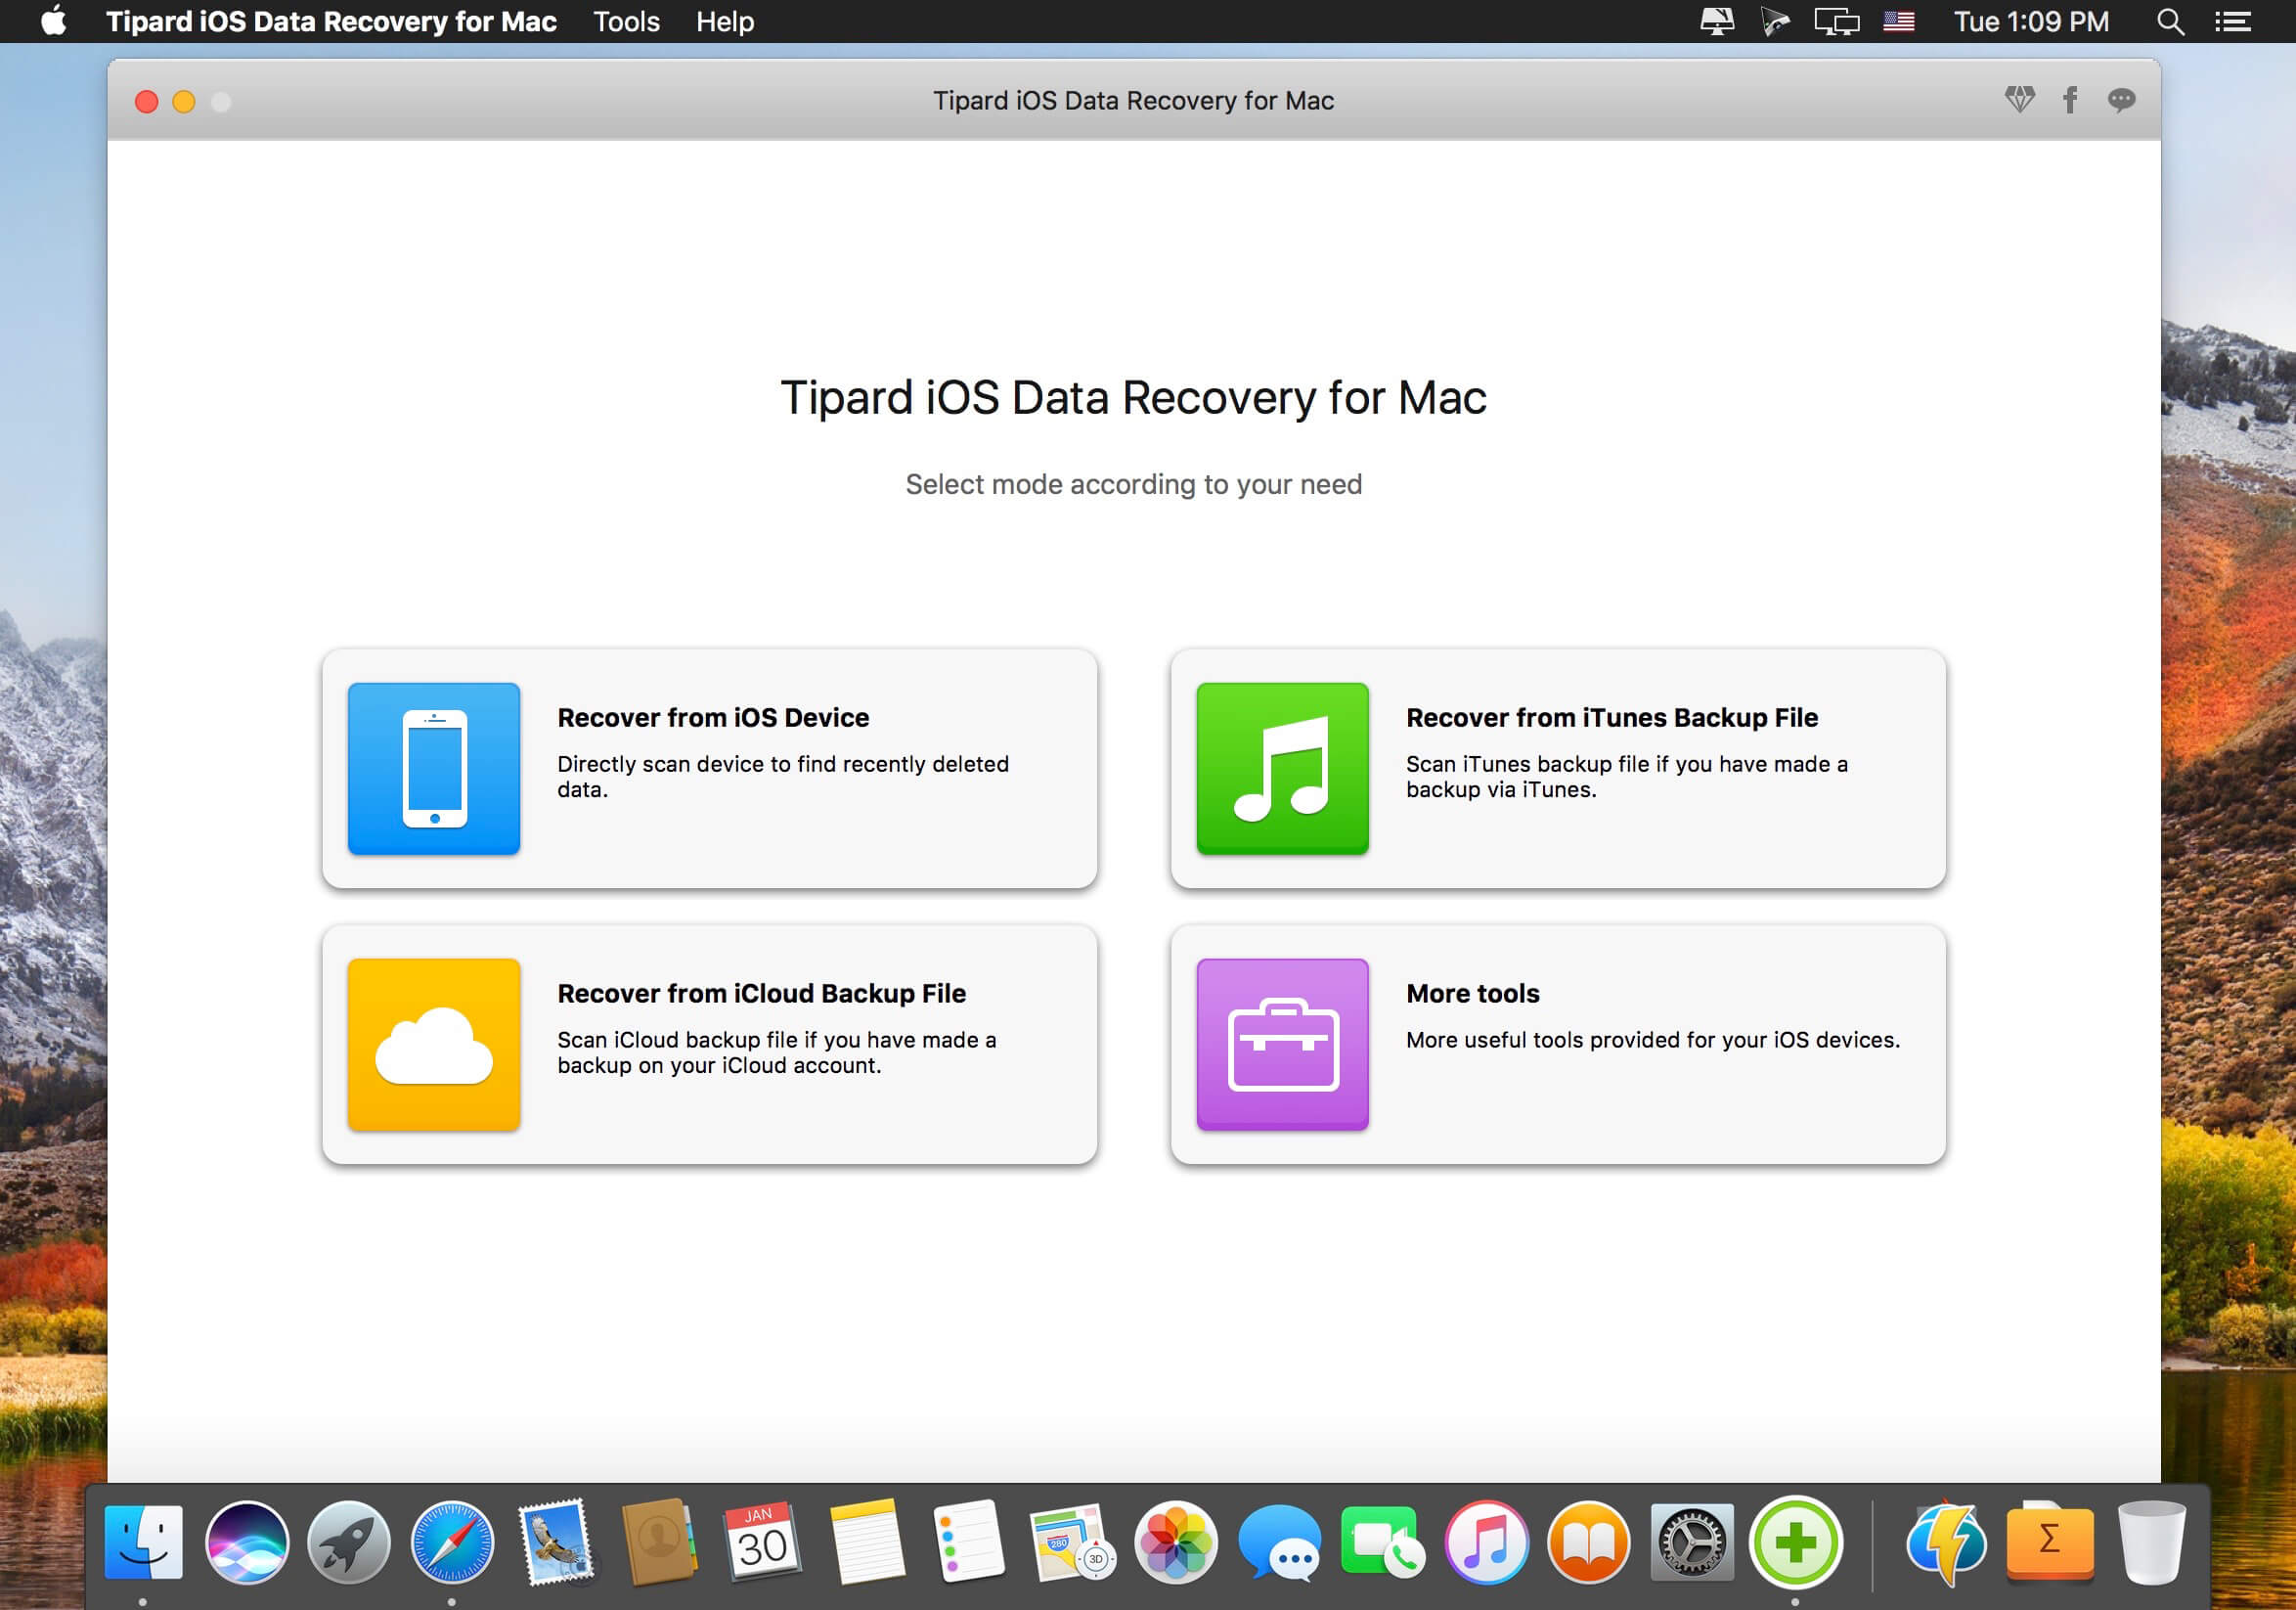 Tipard ios data recovery 8.2.12 downloads